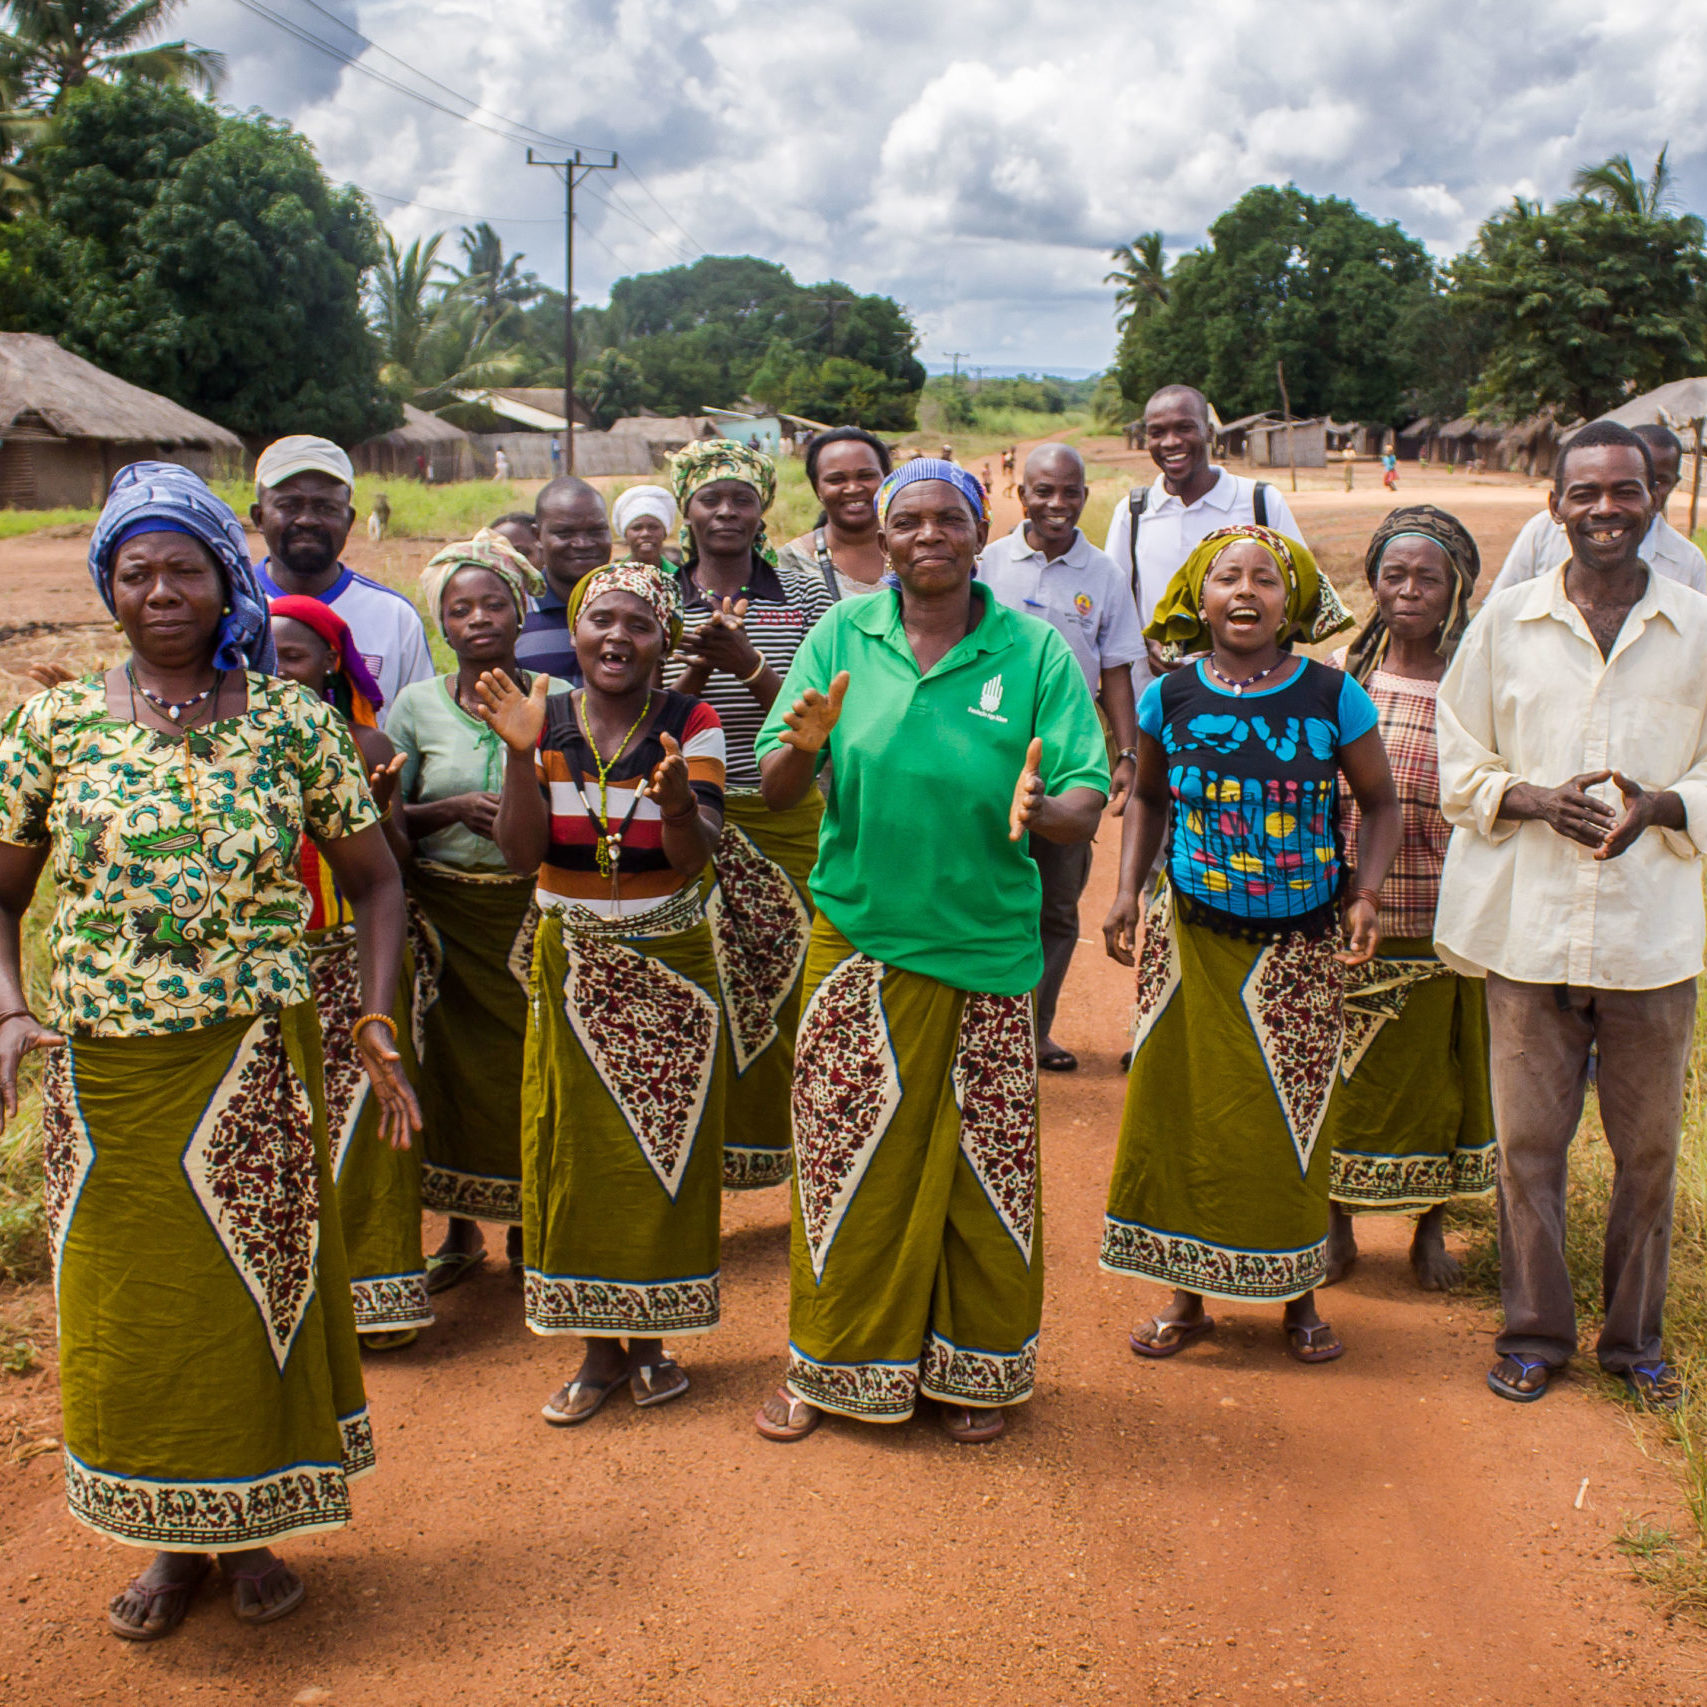 A group of female and male farmers walk together in fields in Mozambique